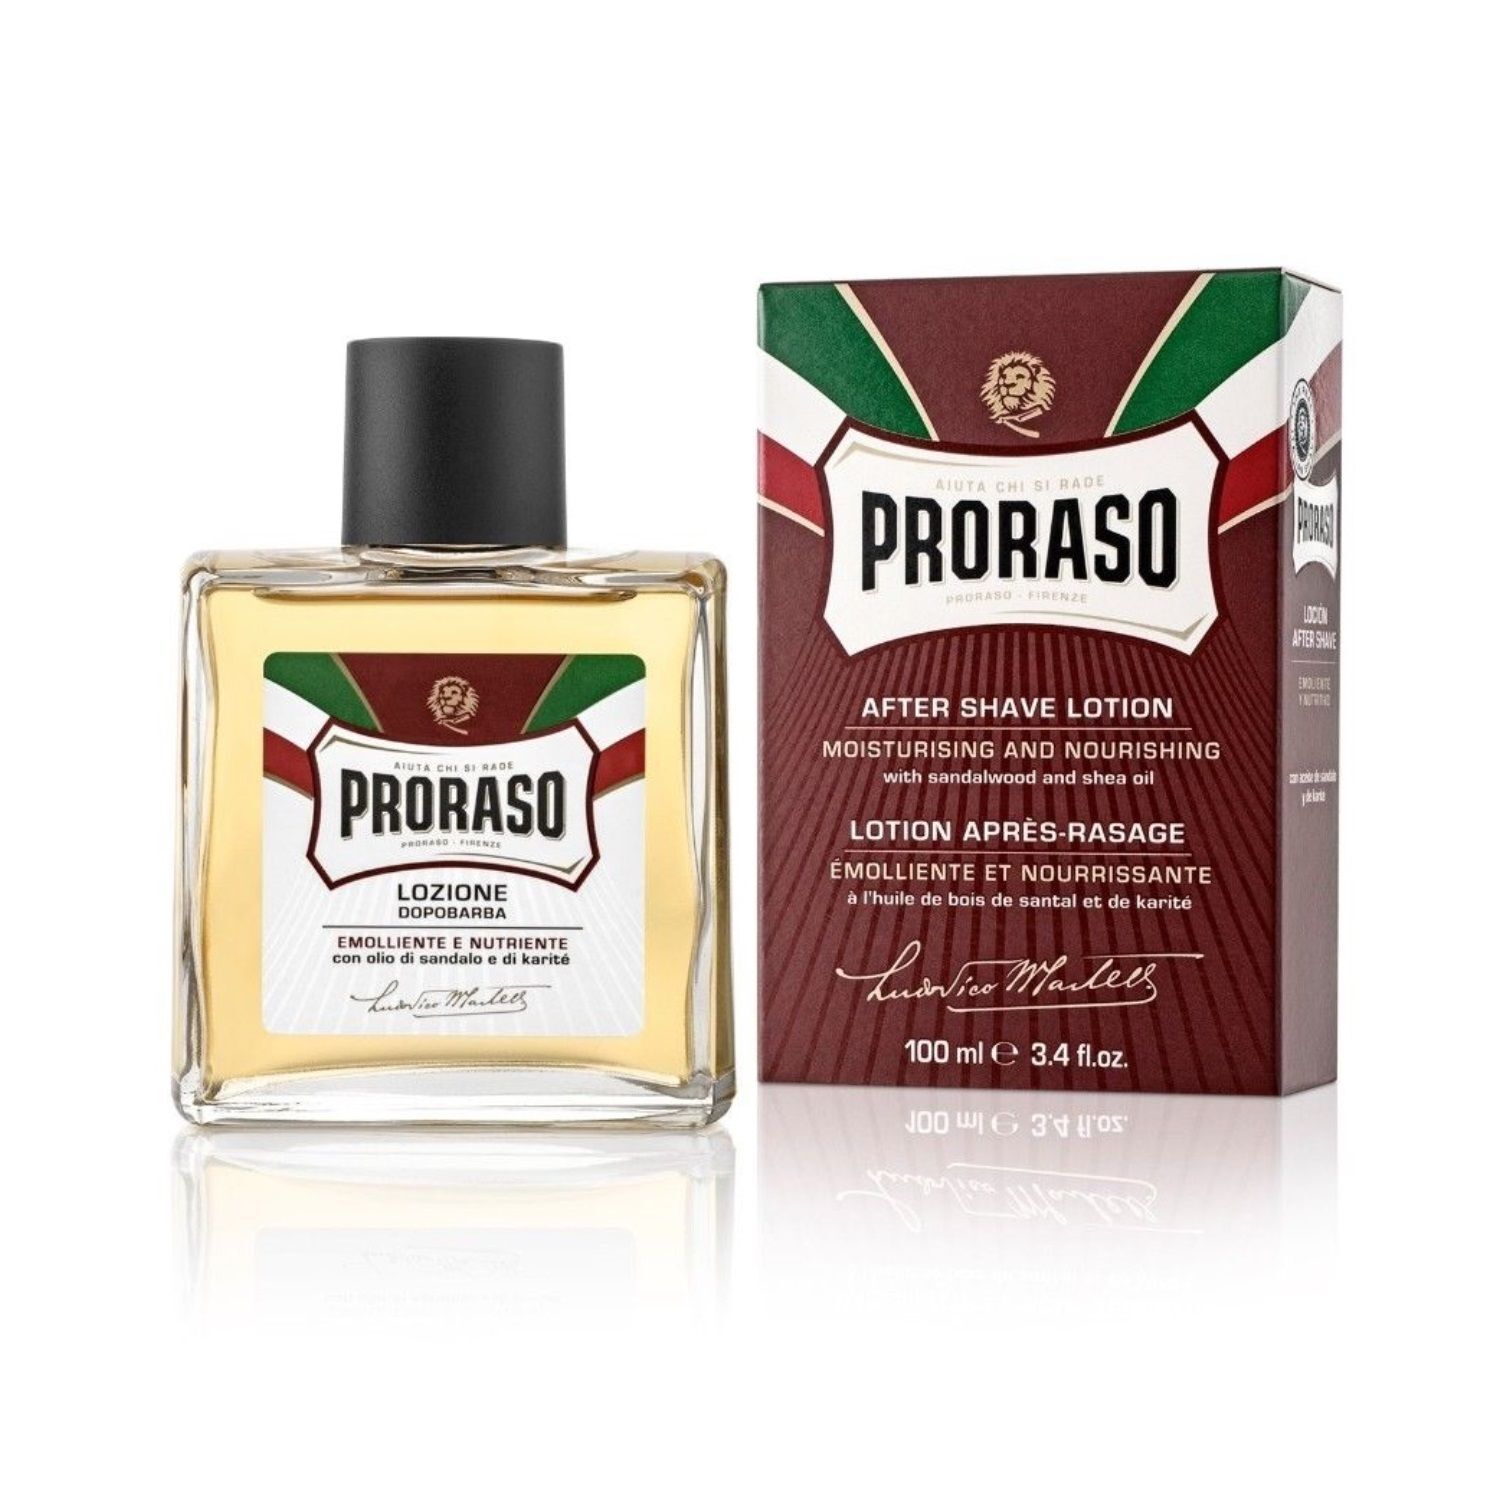 Proraso After Shave Lotion - Moisturising And Nourishing 100ml